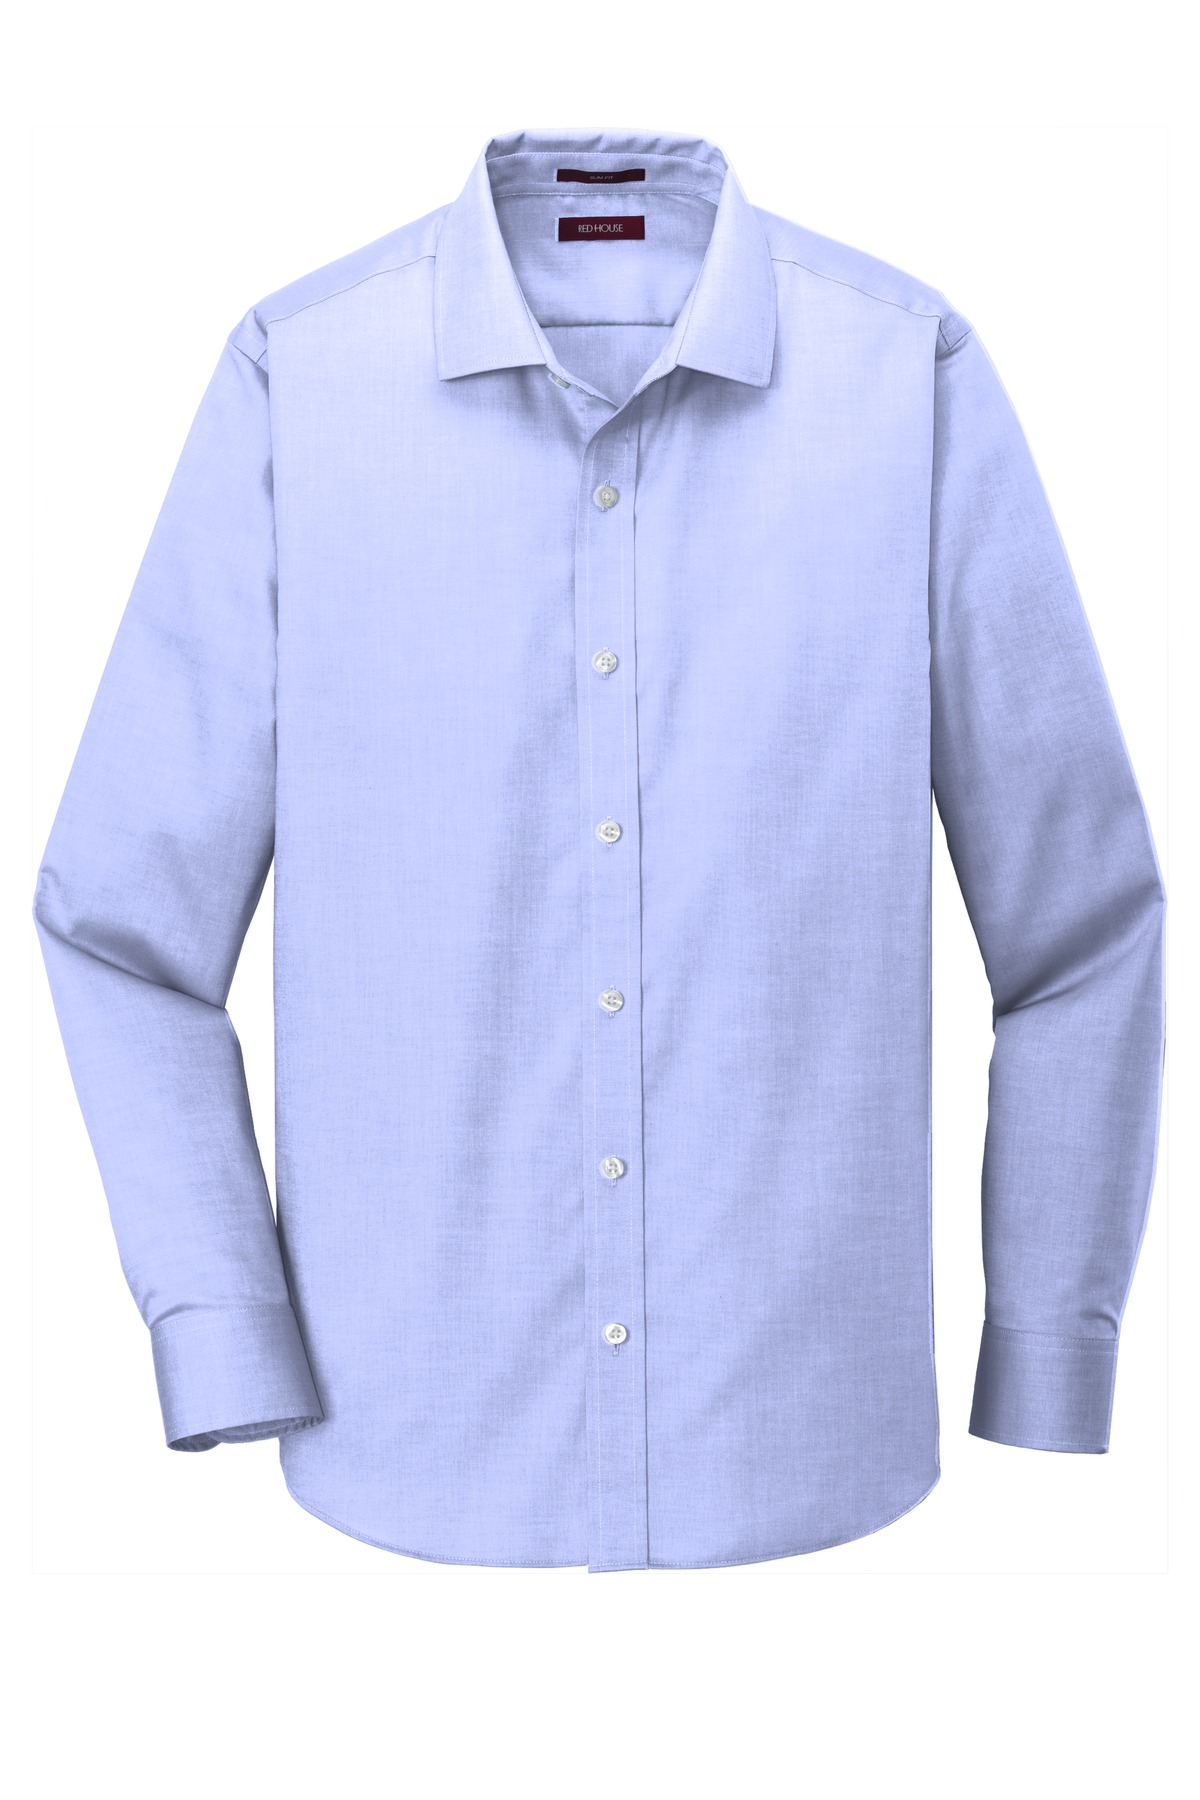 Red House Slim Fit Pinpoint Oxford Non-Iron Shirt. RH620 – Dynasty Custom